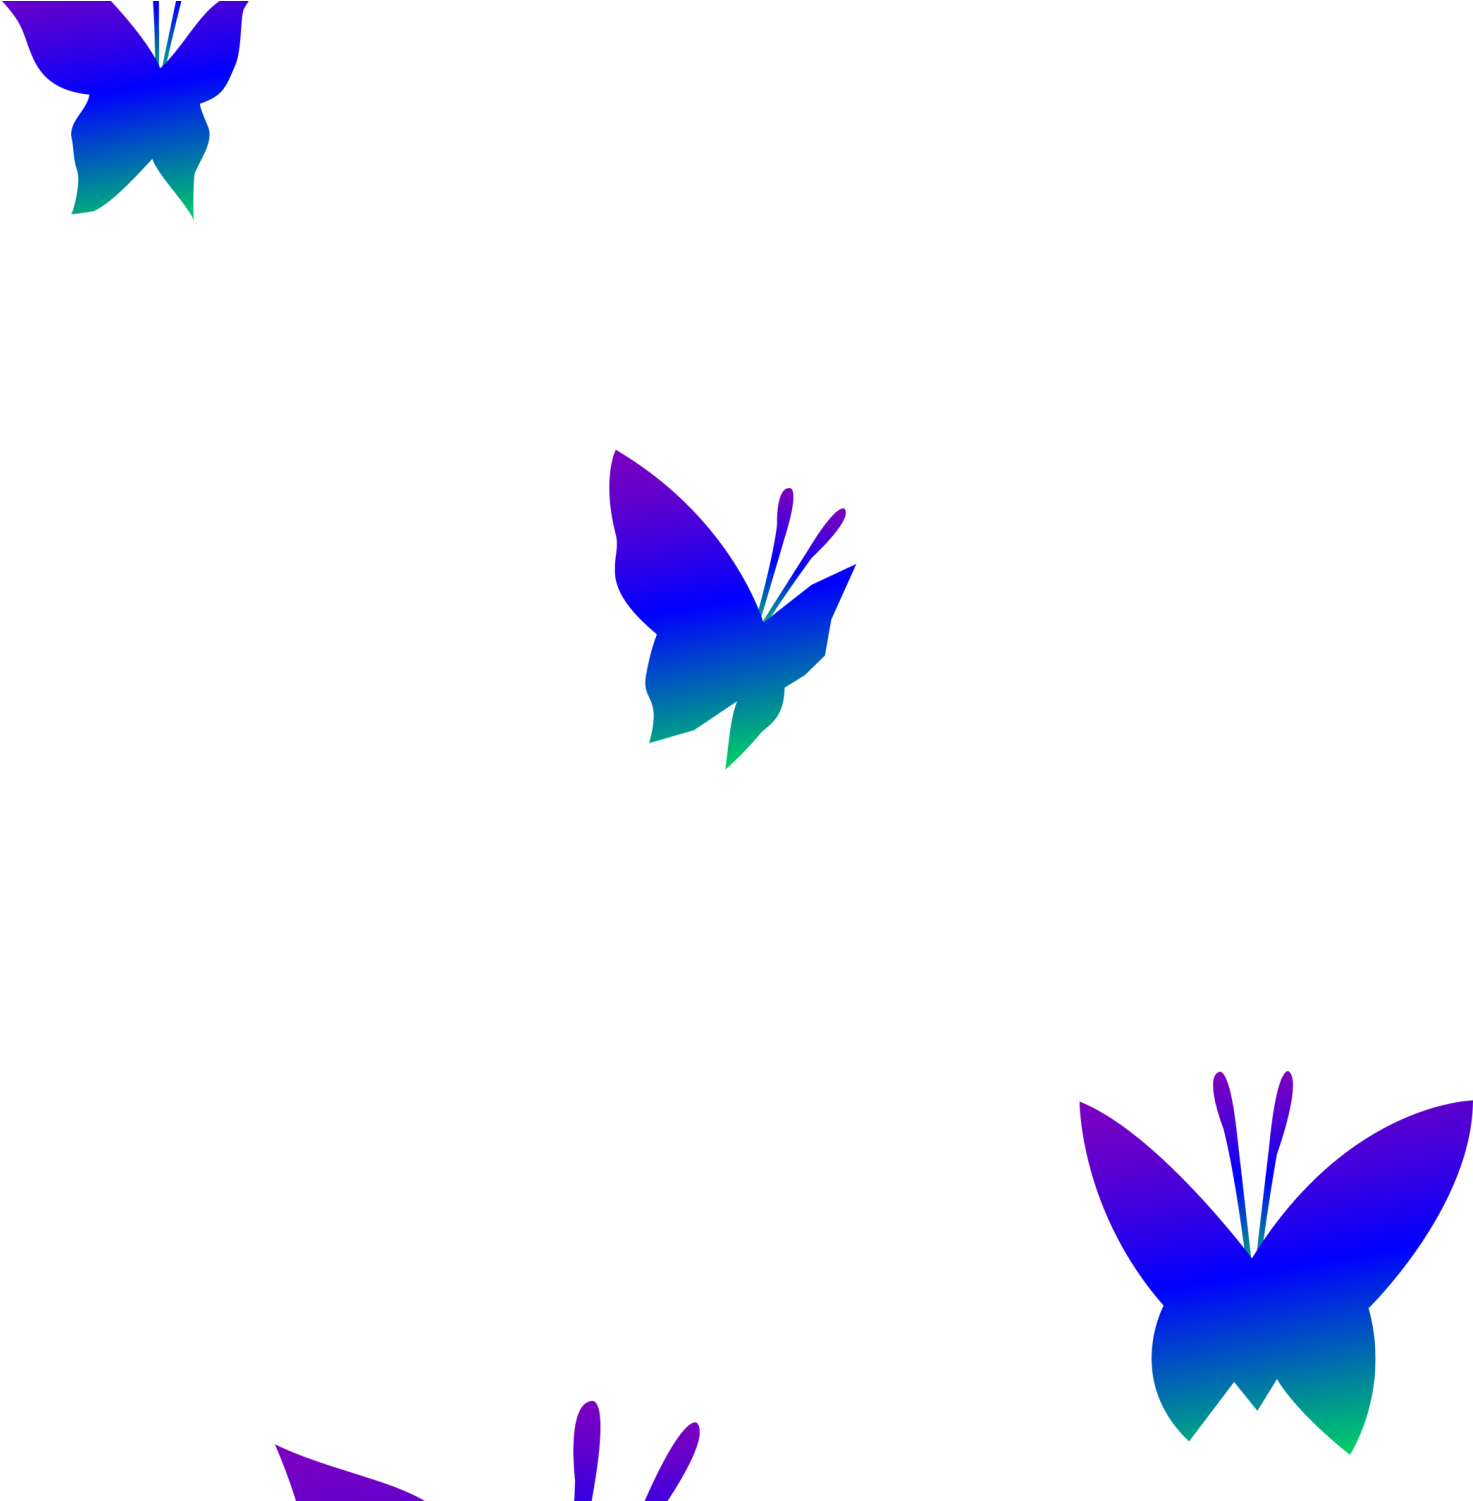 Pink Butterfly Border Clipart Panda Free Clipart Images - Flying Butterfly Silhouette (1500x1500)